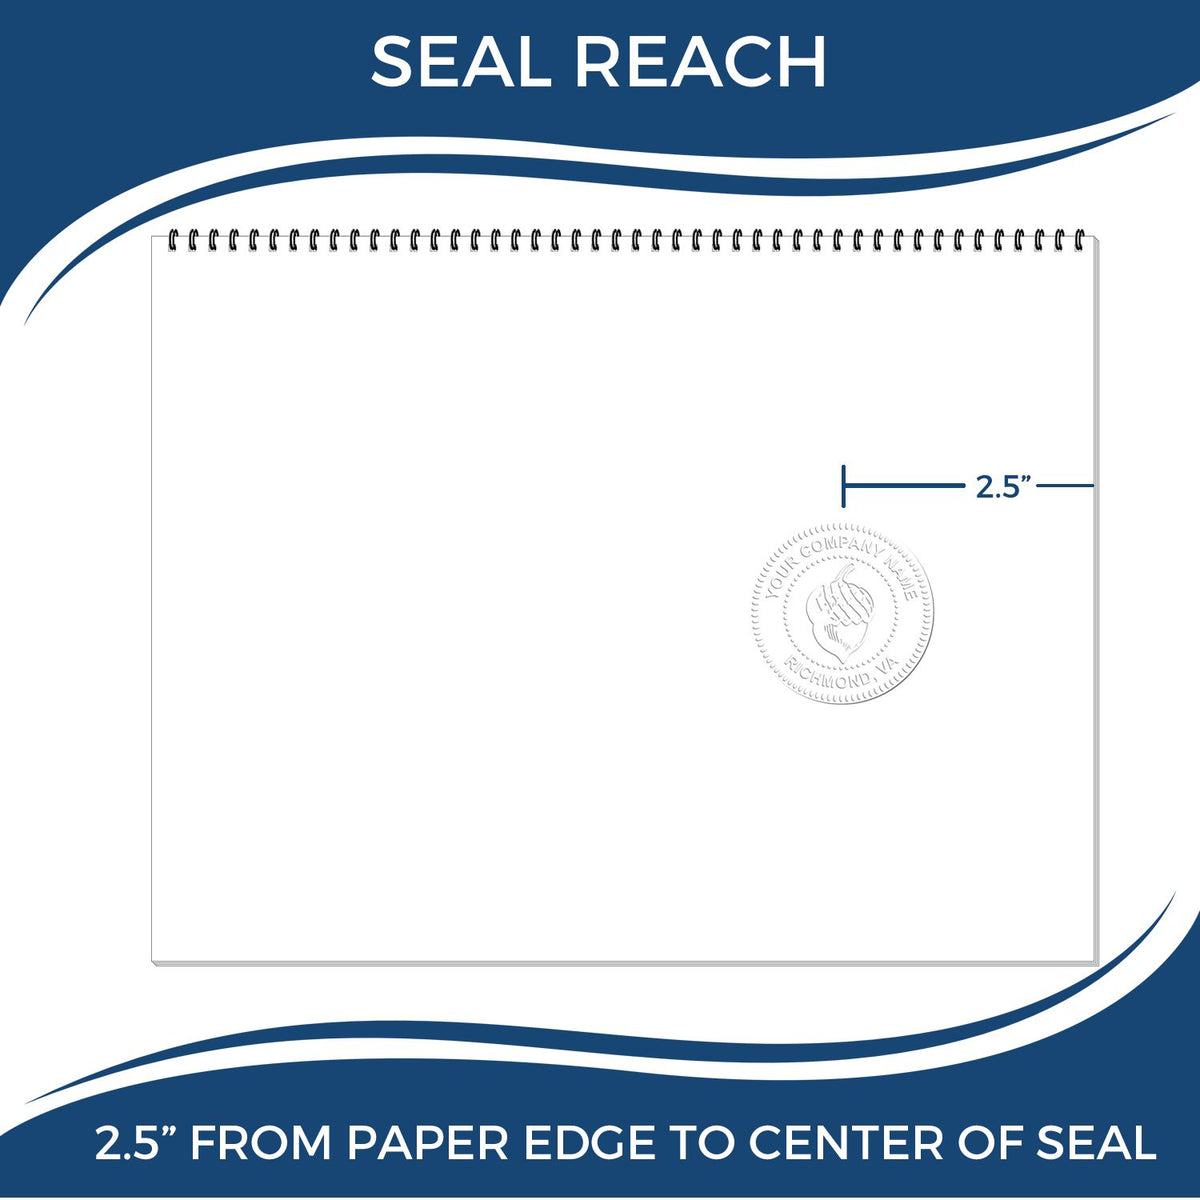 An infographic showing the seal reach which is represented by a ruler and a miniature seal image of the State of Missouri Long Reach Architectural Embossing Seal